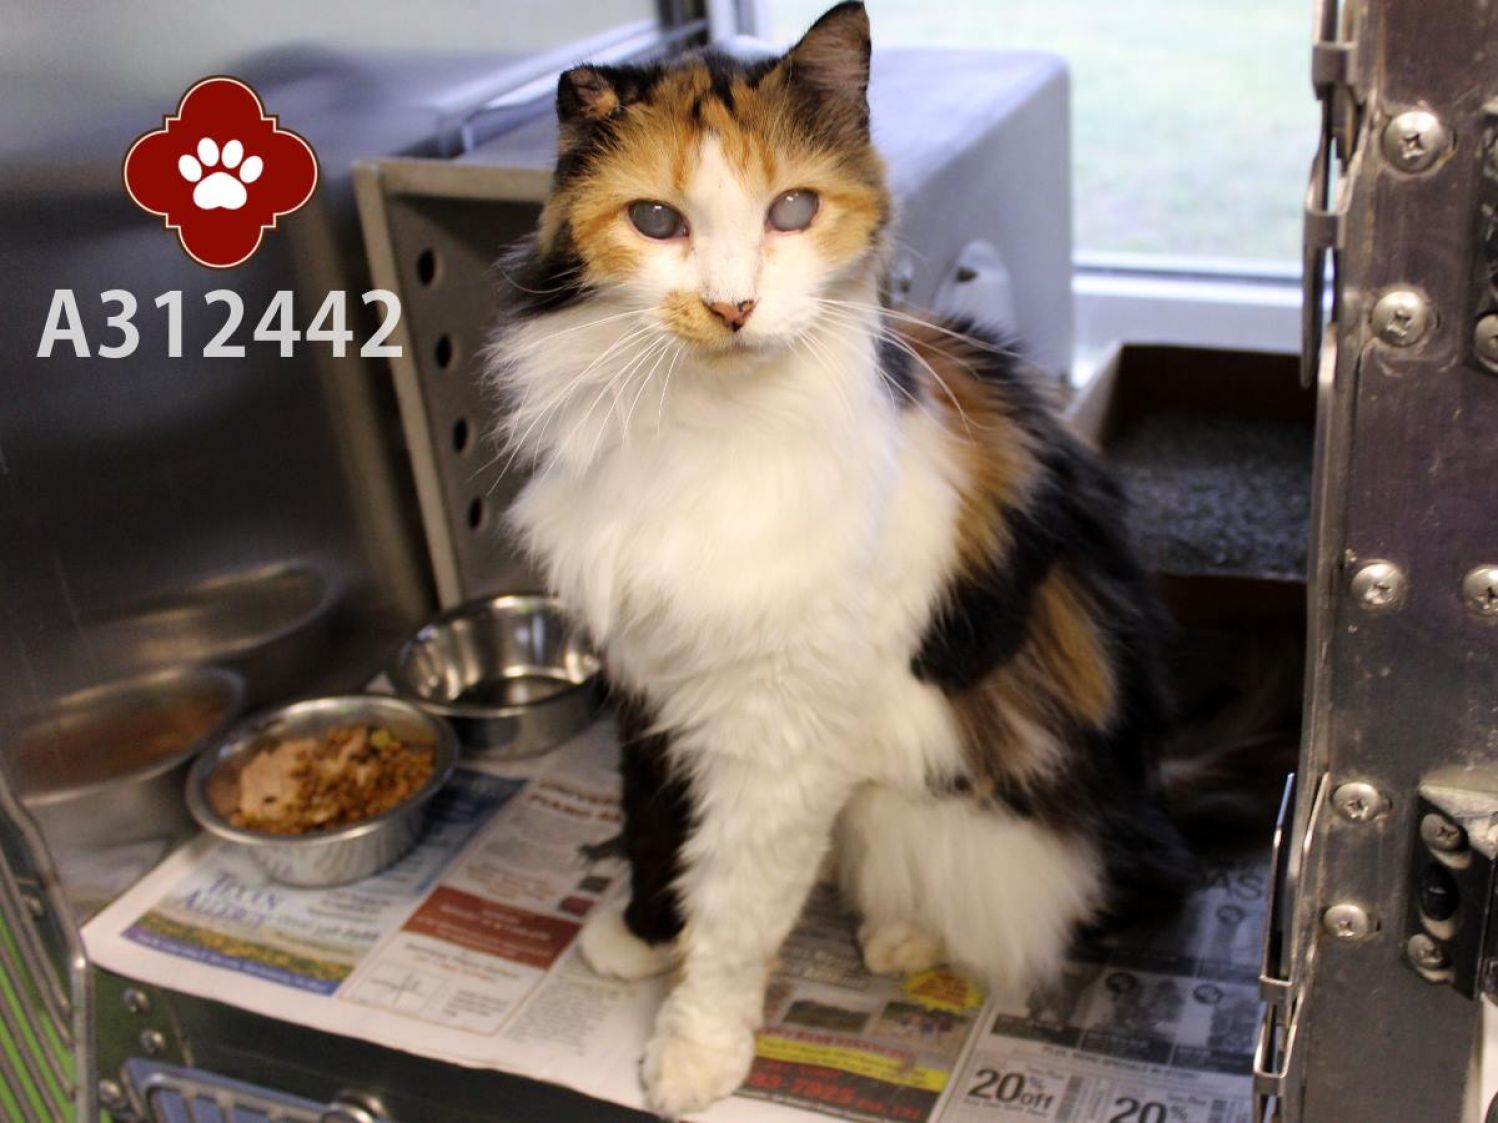 Rose - blind 25 yo senior calico cat - surrendered to shelter and then adopted